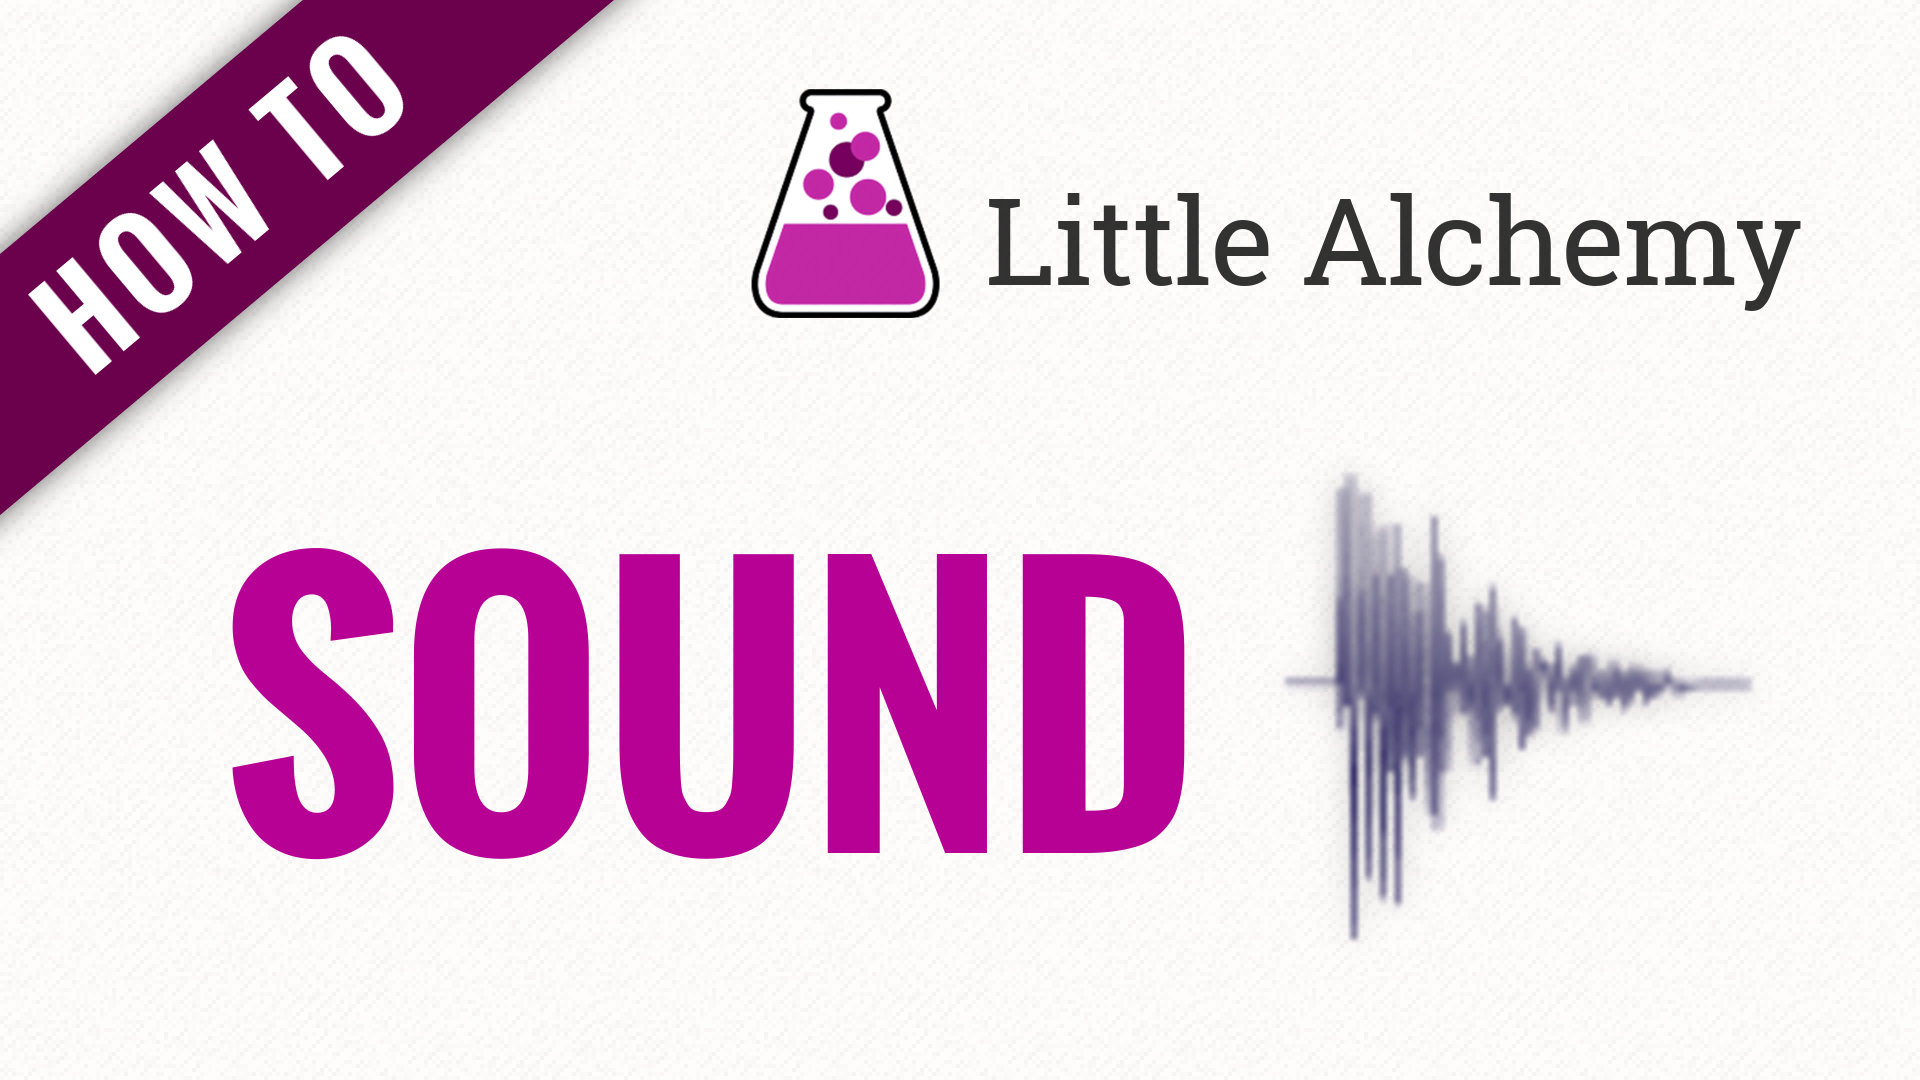 How To Make Sound In Little Alchemy